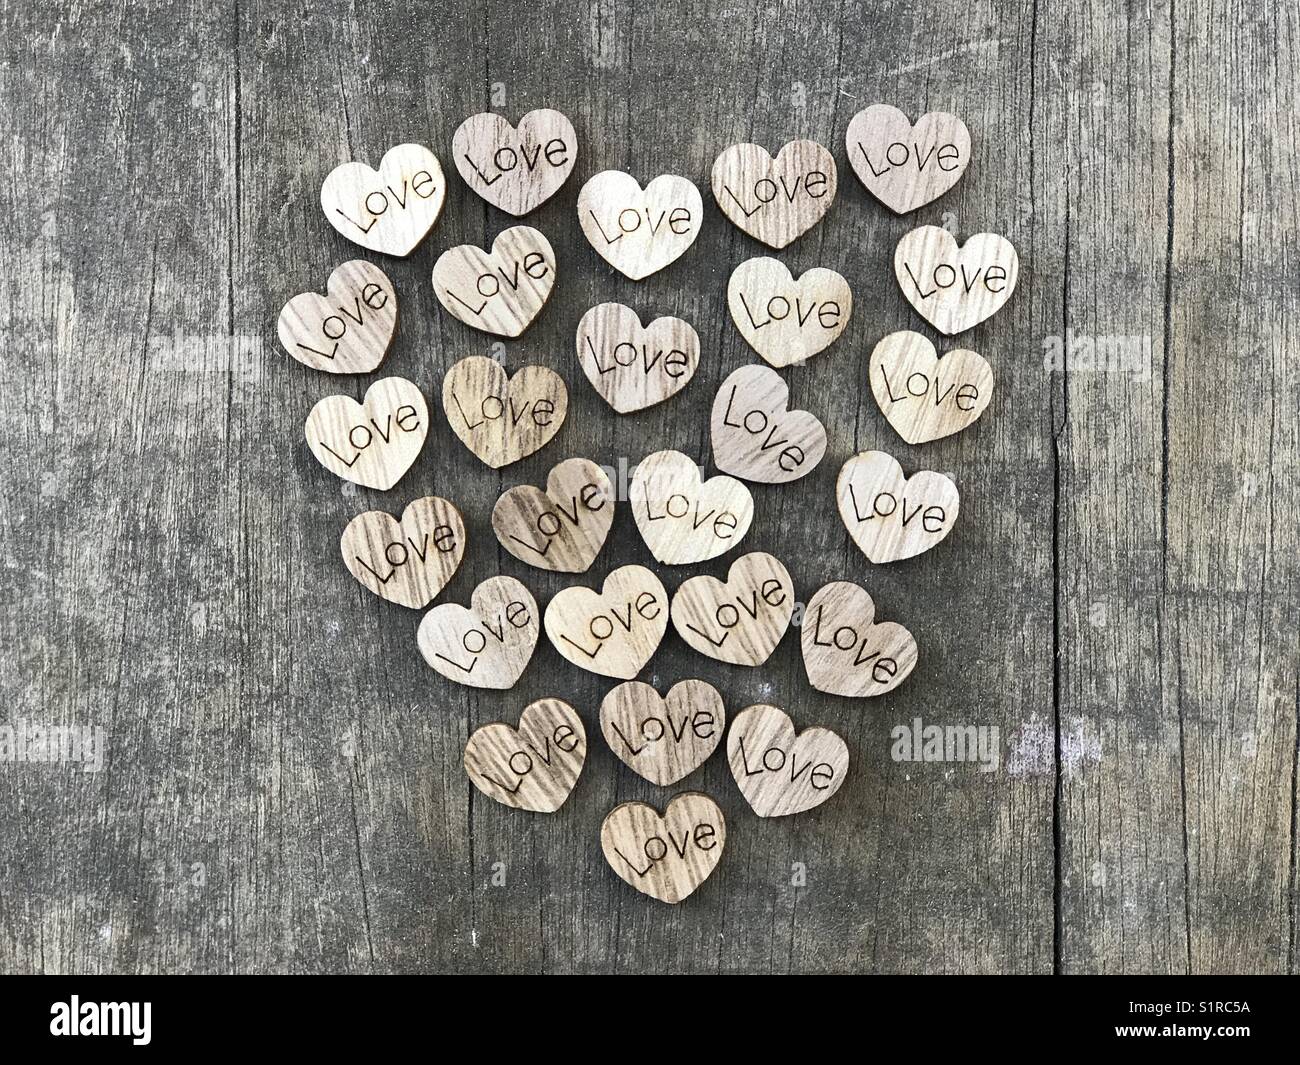 Cloud of love wooden hearts Stock Photo